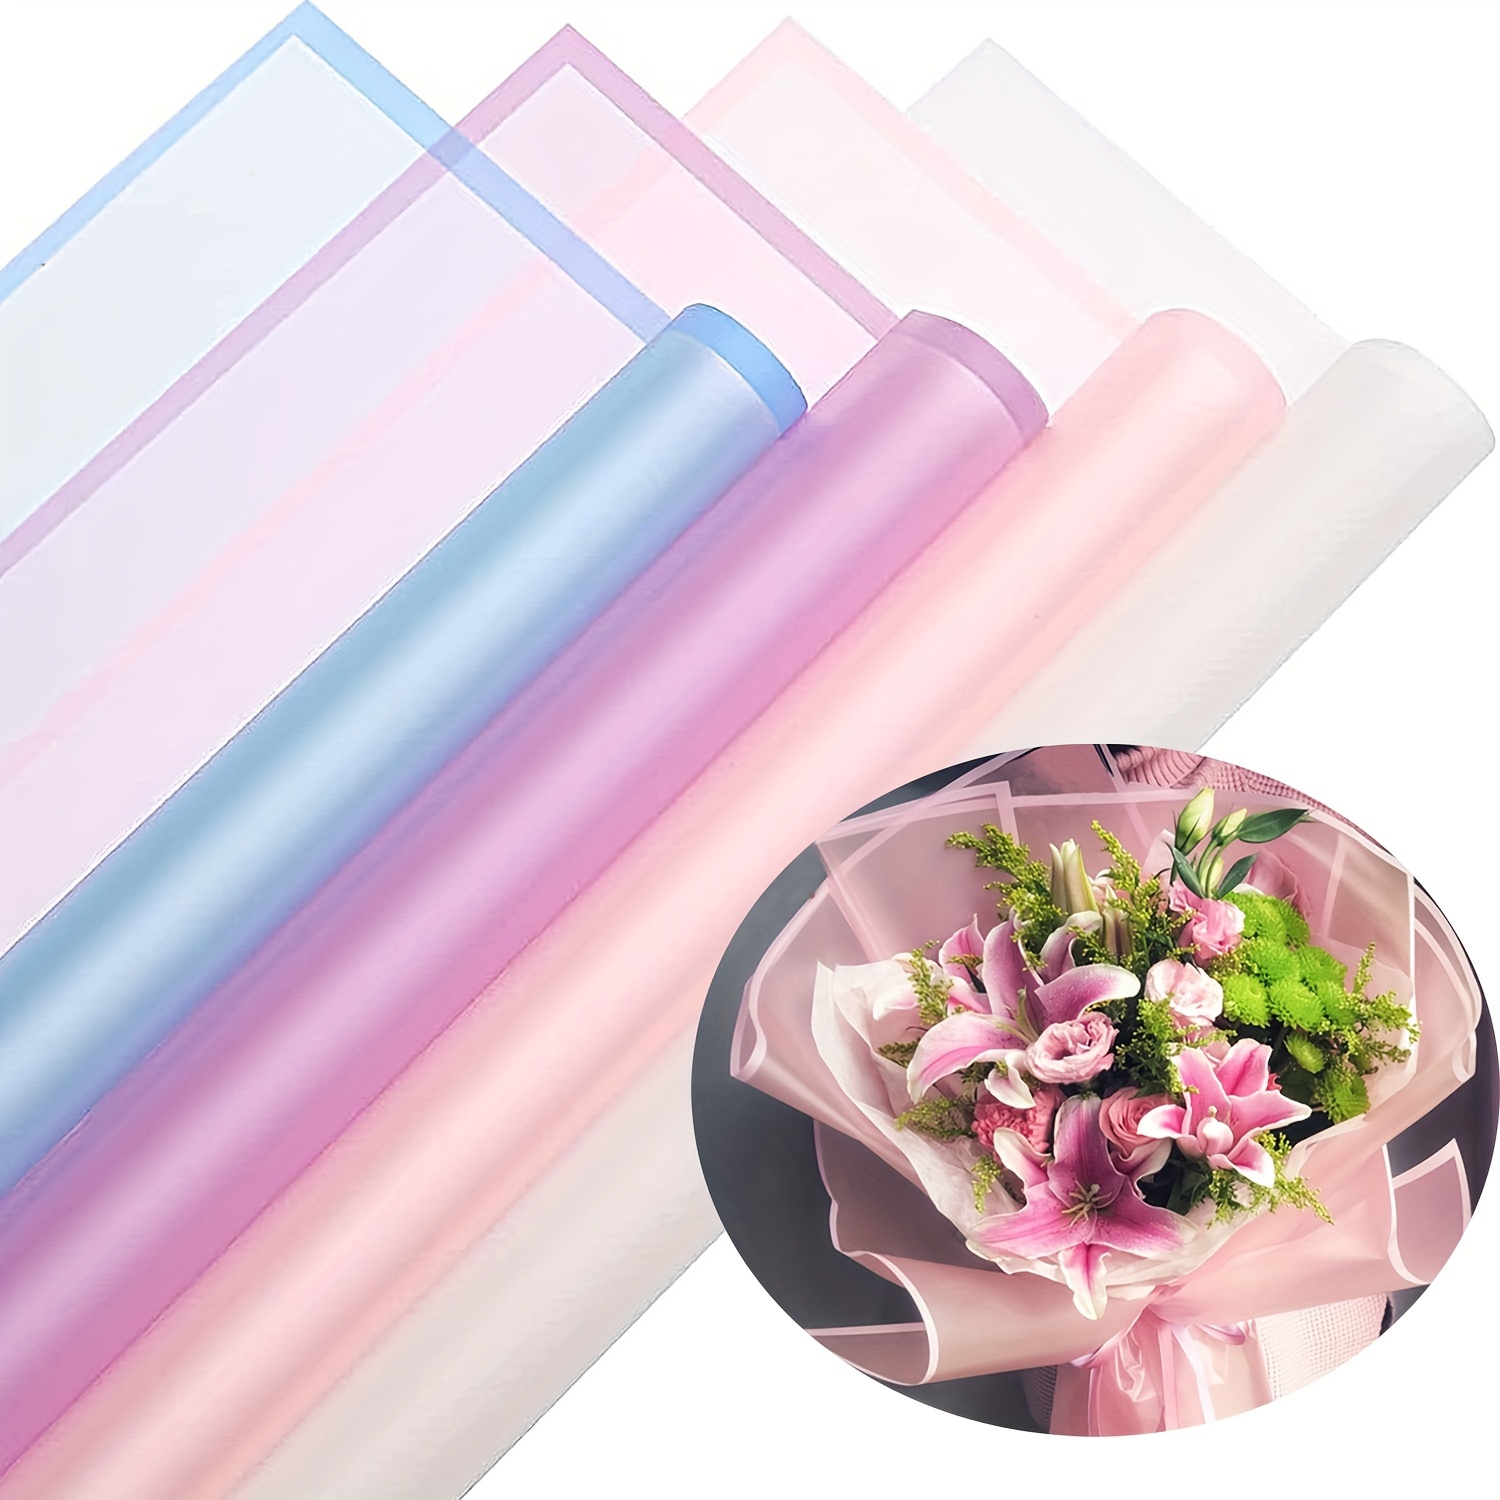 Flower Wrapping Paper,Florist Bouquet Supplies,DIY Crafts,Gift